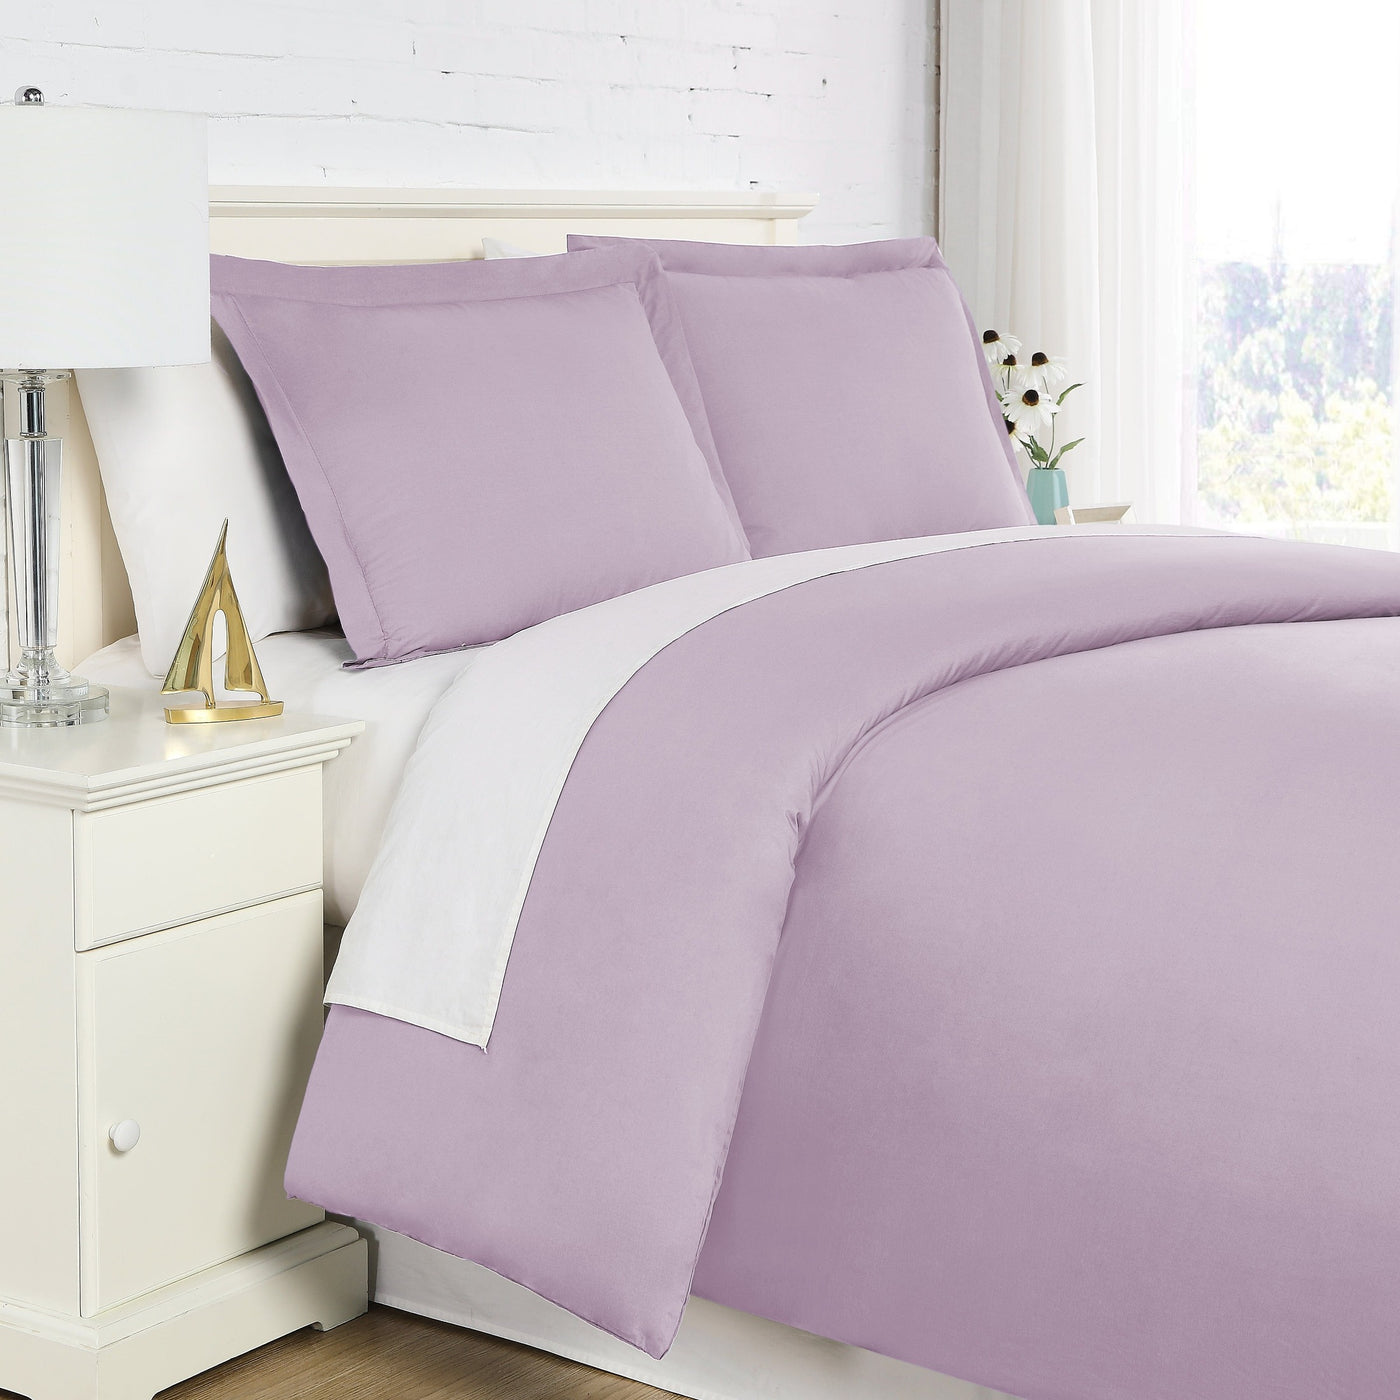 Side View of Everyday Essentials Duvet Cover Set in Lilac#color_lilac